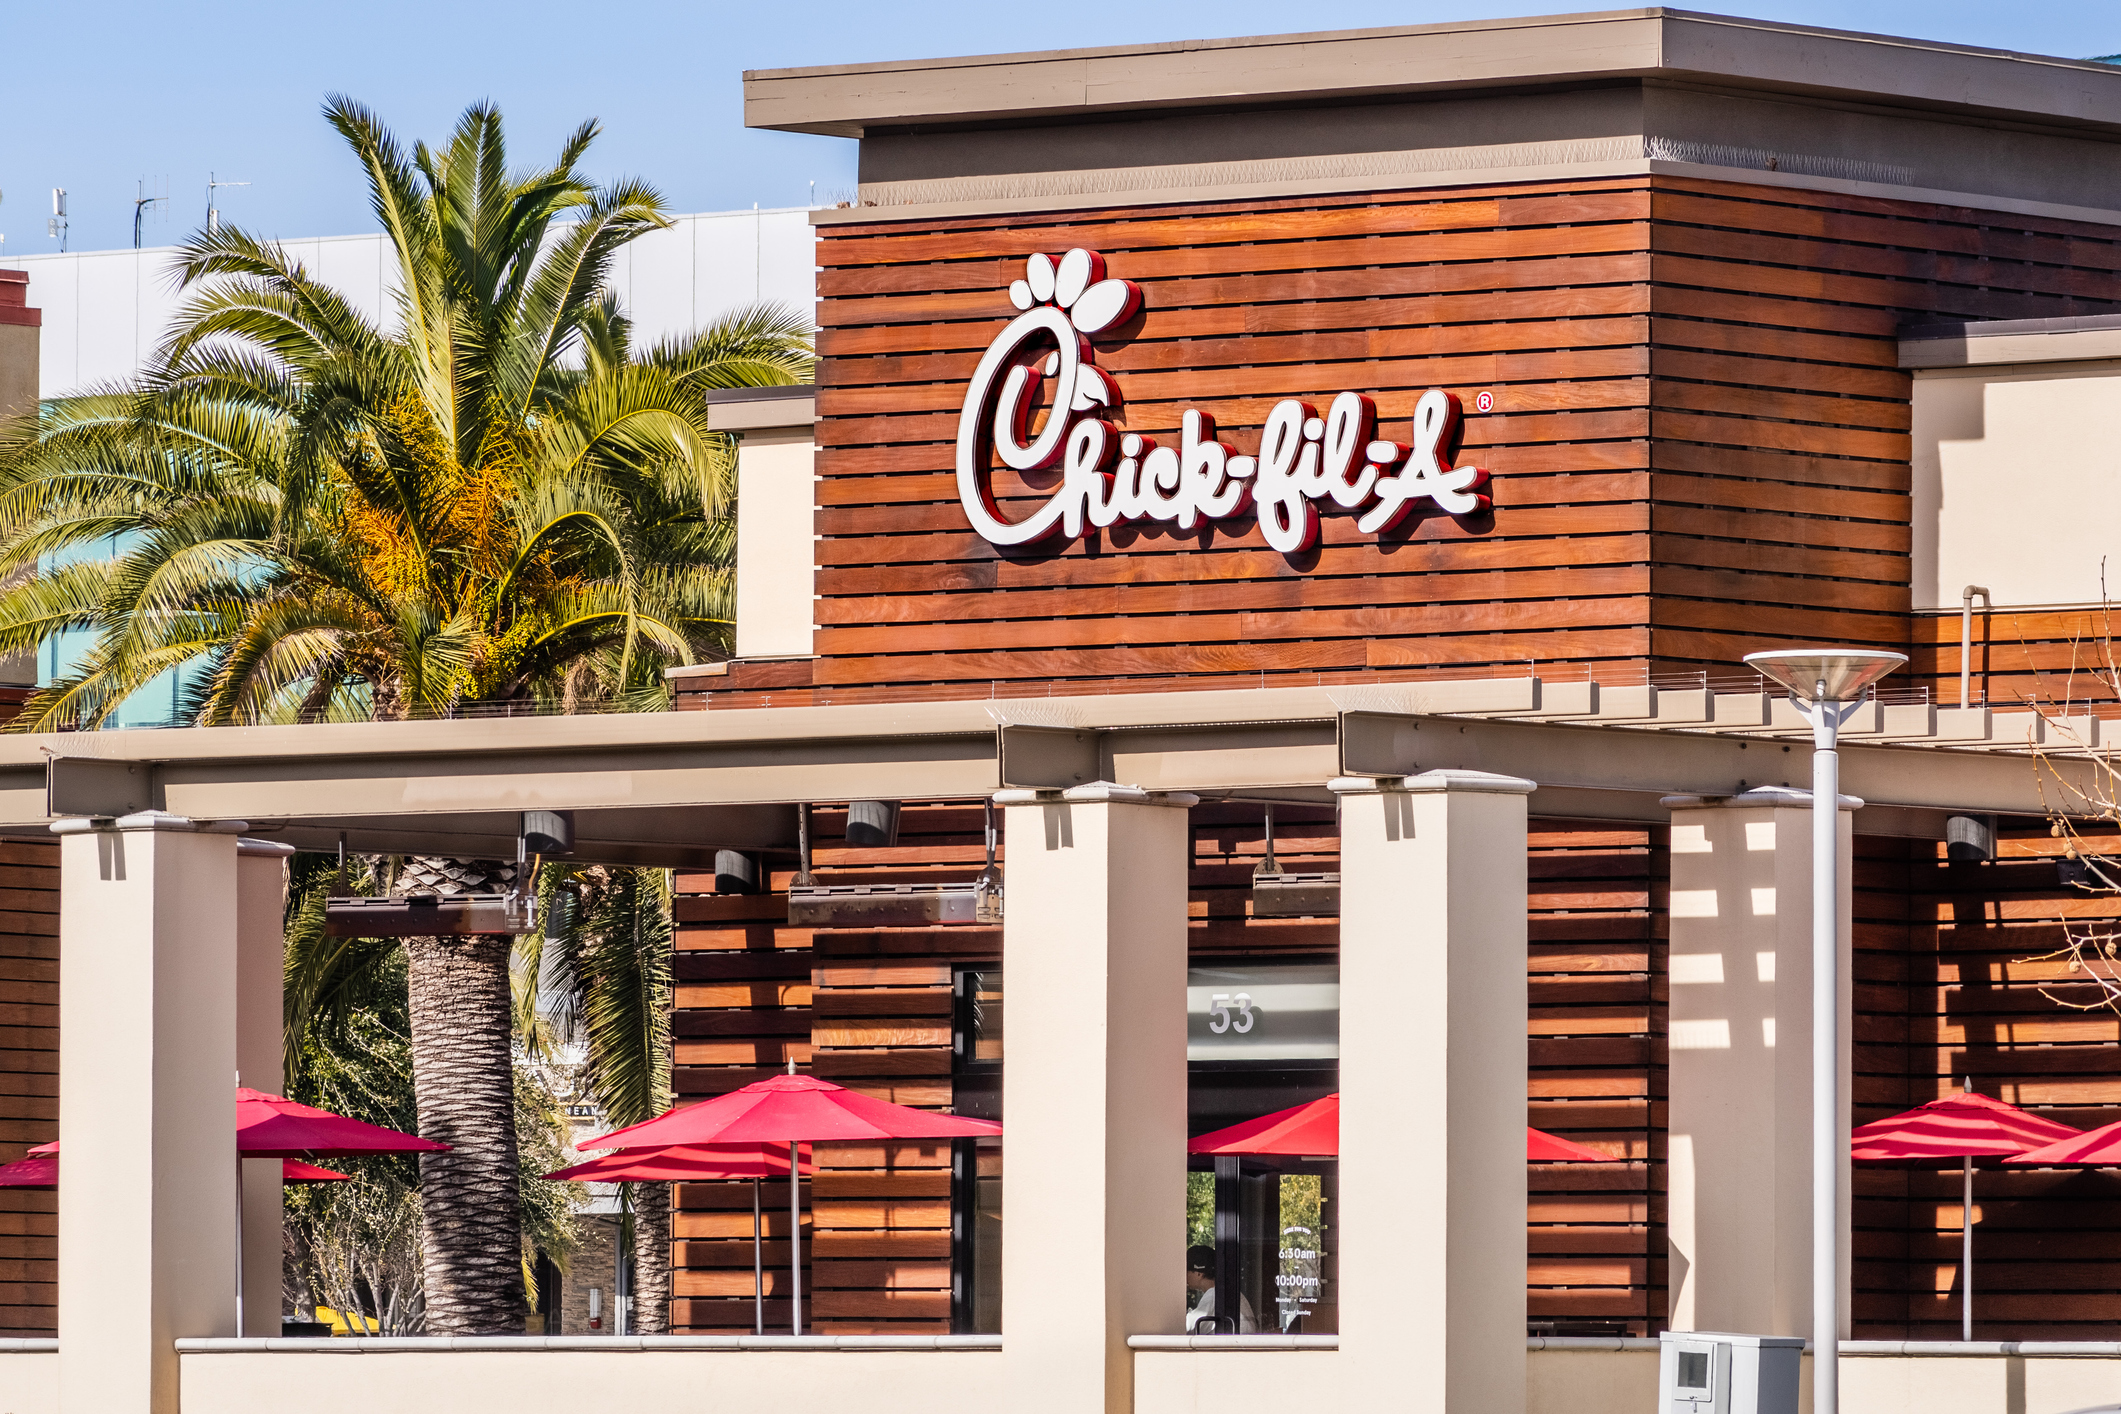 Chick-fil-A is Offering $5M in Grants For Black-Led Nonprofits